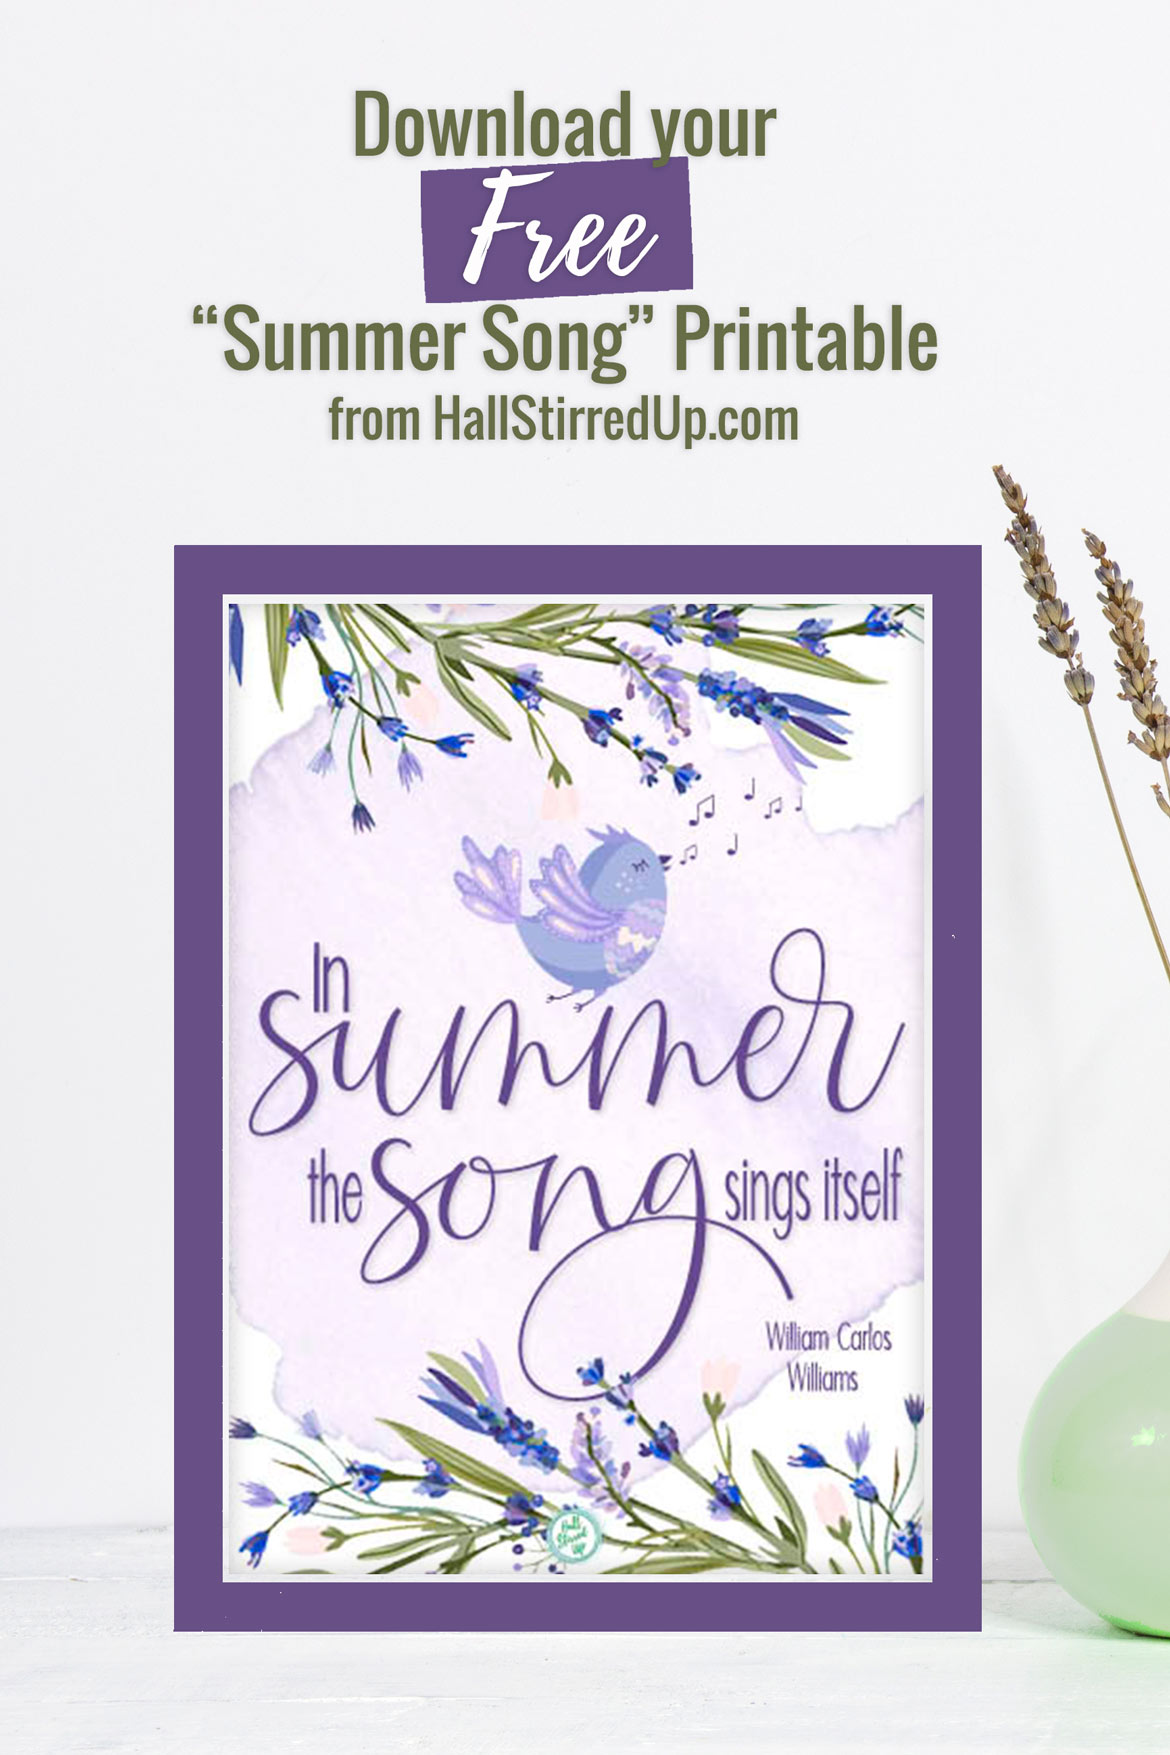 Pretty Summer Song quote and a new free printable